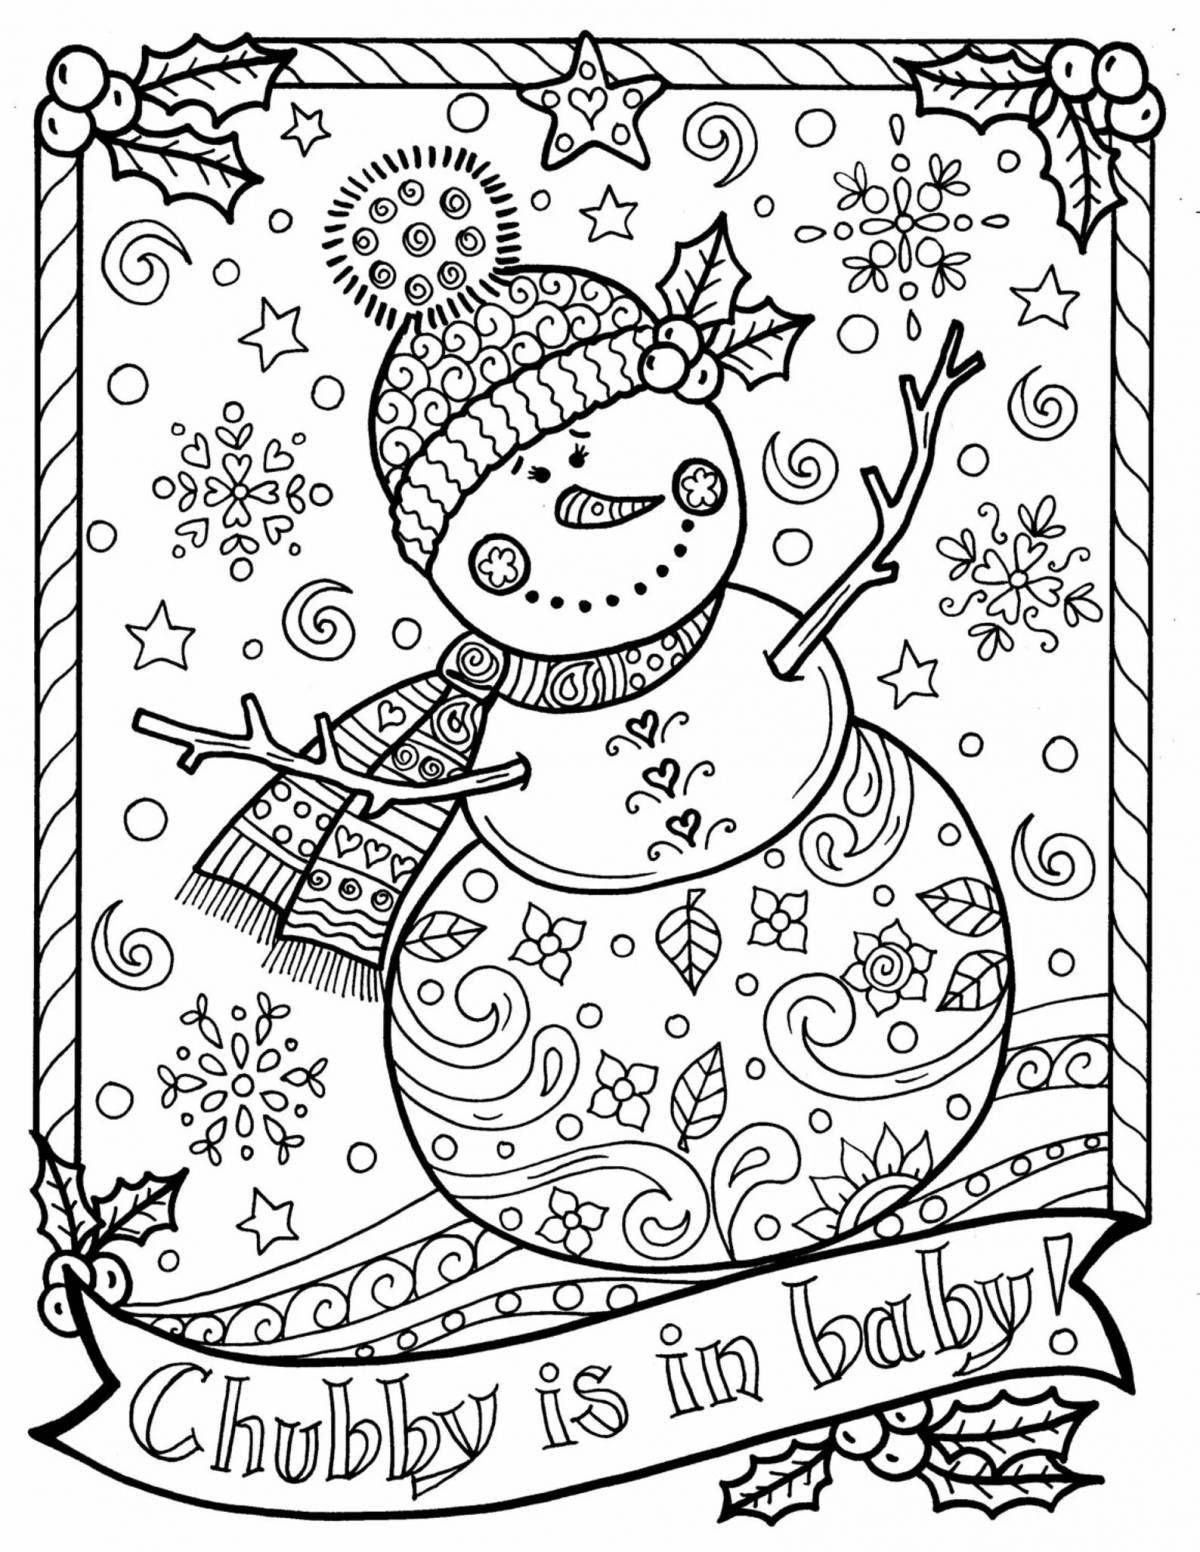 Animated snowman antistress coloring book